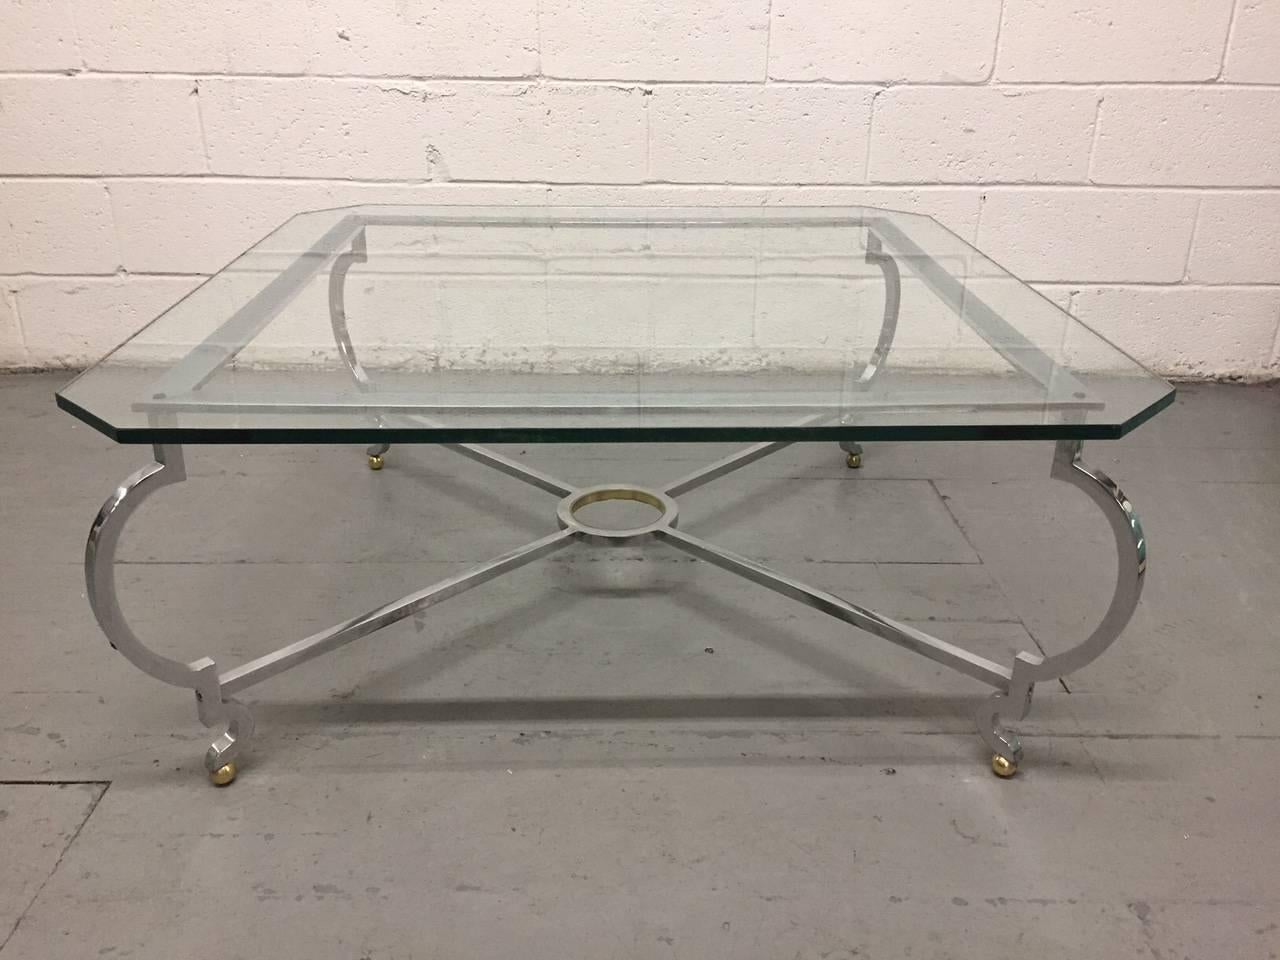 Polished steel and brass coffee table manner of Jansen. Stretcher has curved legs with brass ball feet.
   